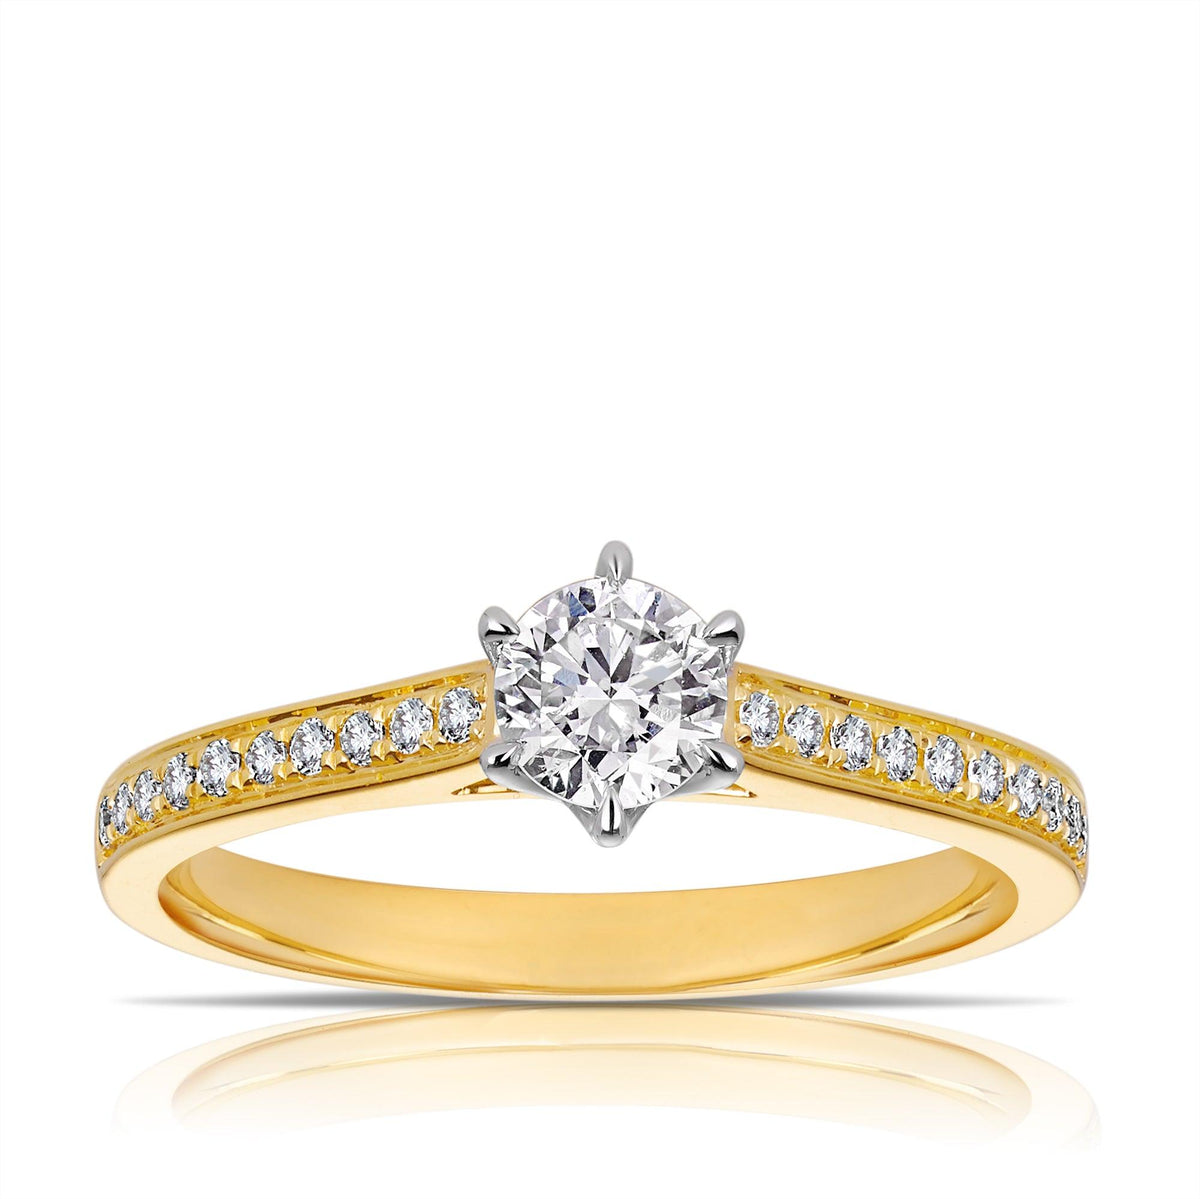 Solitaire Diamond Engagement Ring in 18ct Yellow and White Gold TGW 0.5 - Wallace Bishop